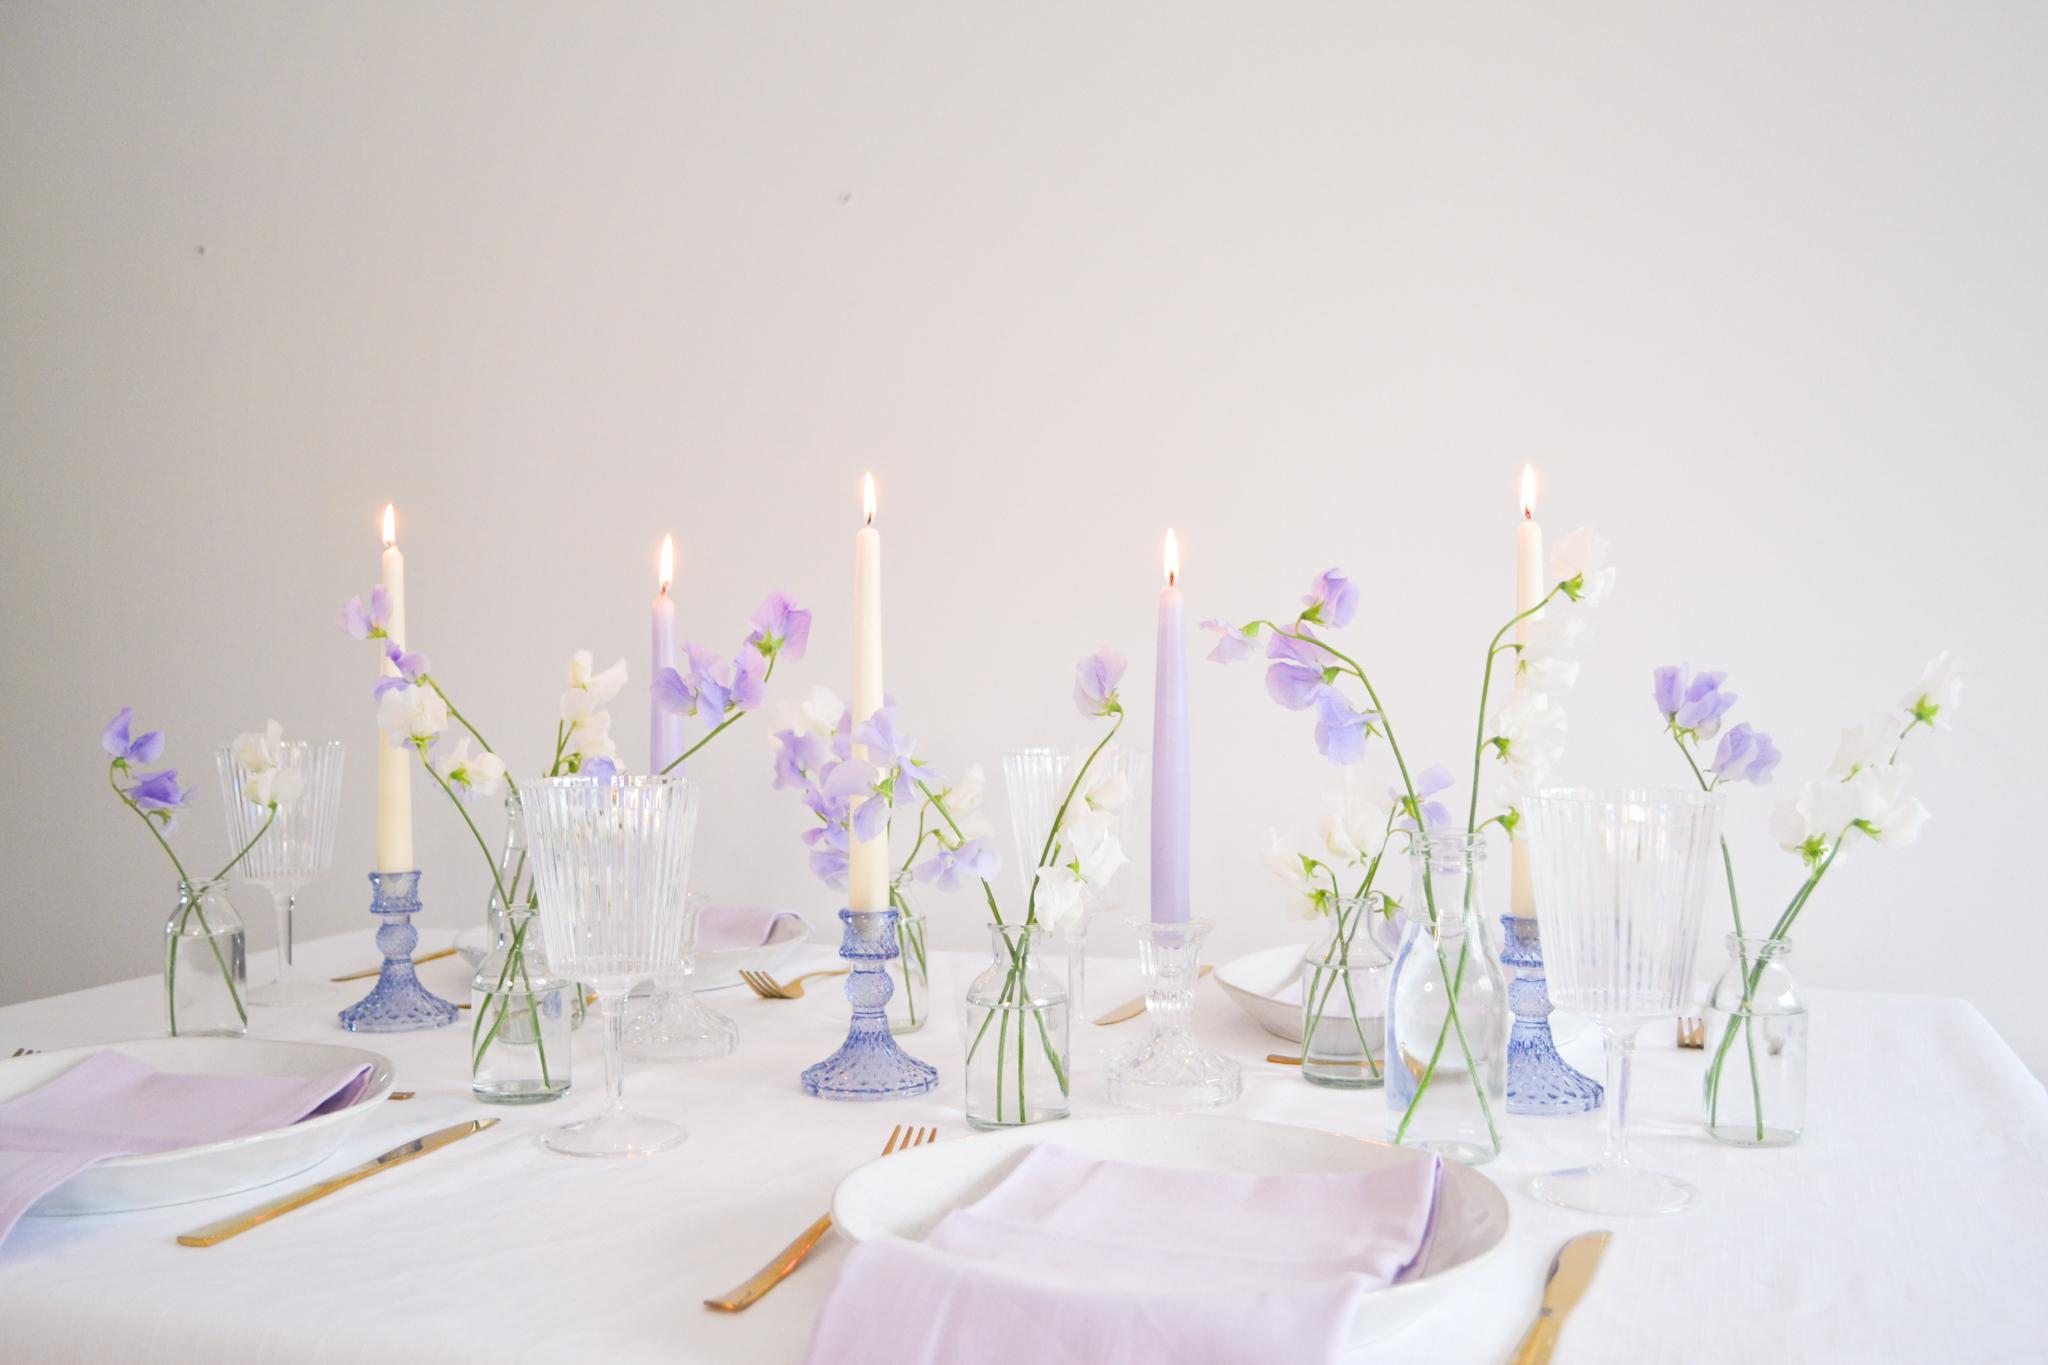 Lilac and white sweet peas with tapered candles